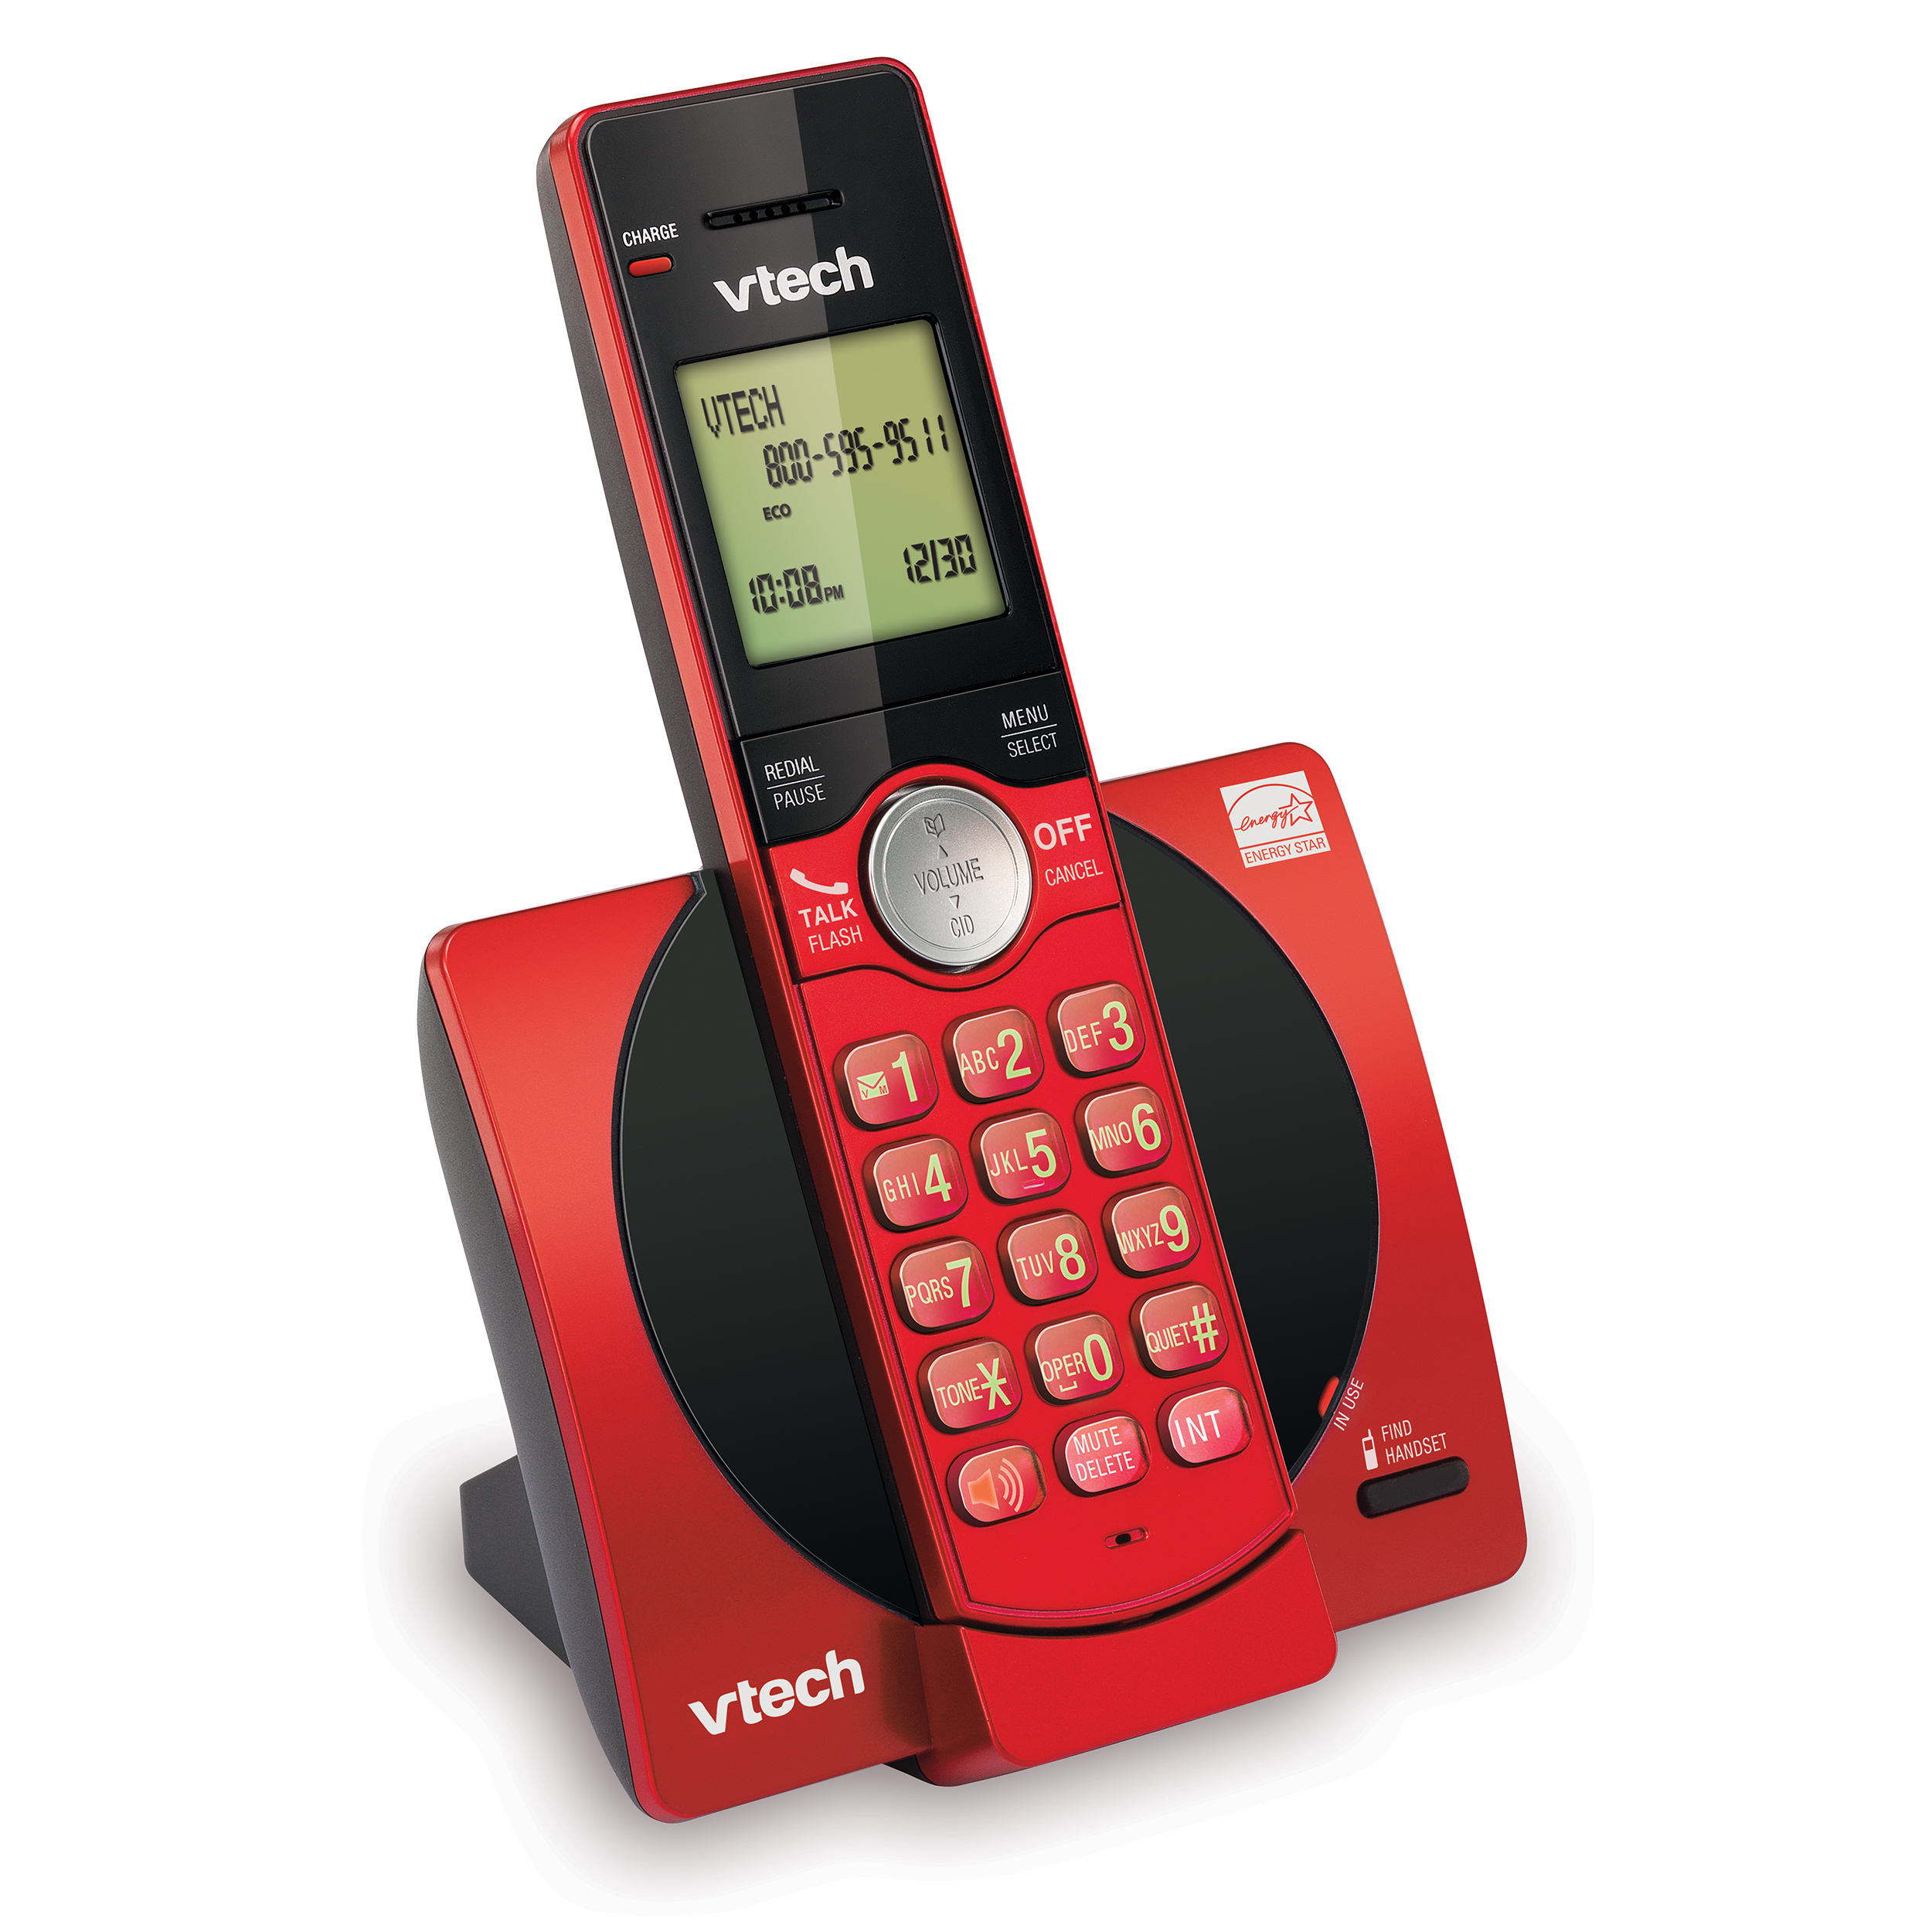 VTech CS6919-16 DECT 6.0 Cordless Phone with Caller ID and Handset Speakerphone, Red - image 2 of 3